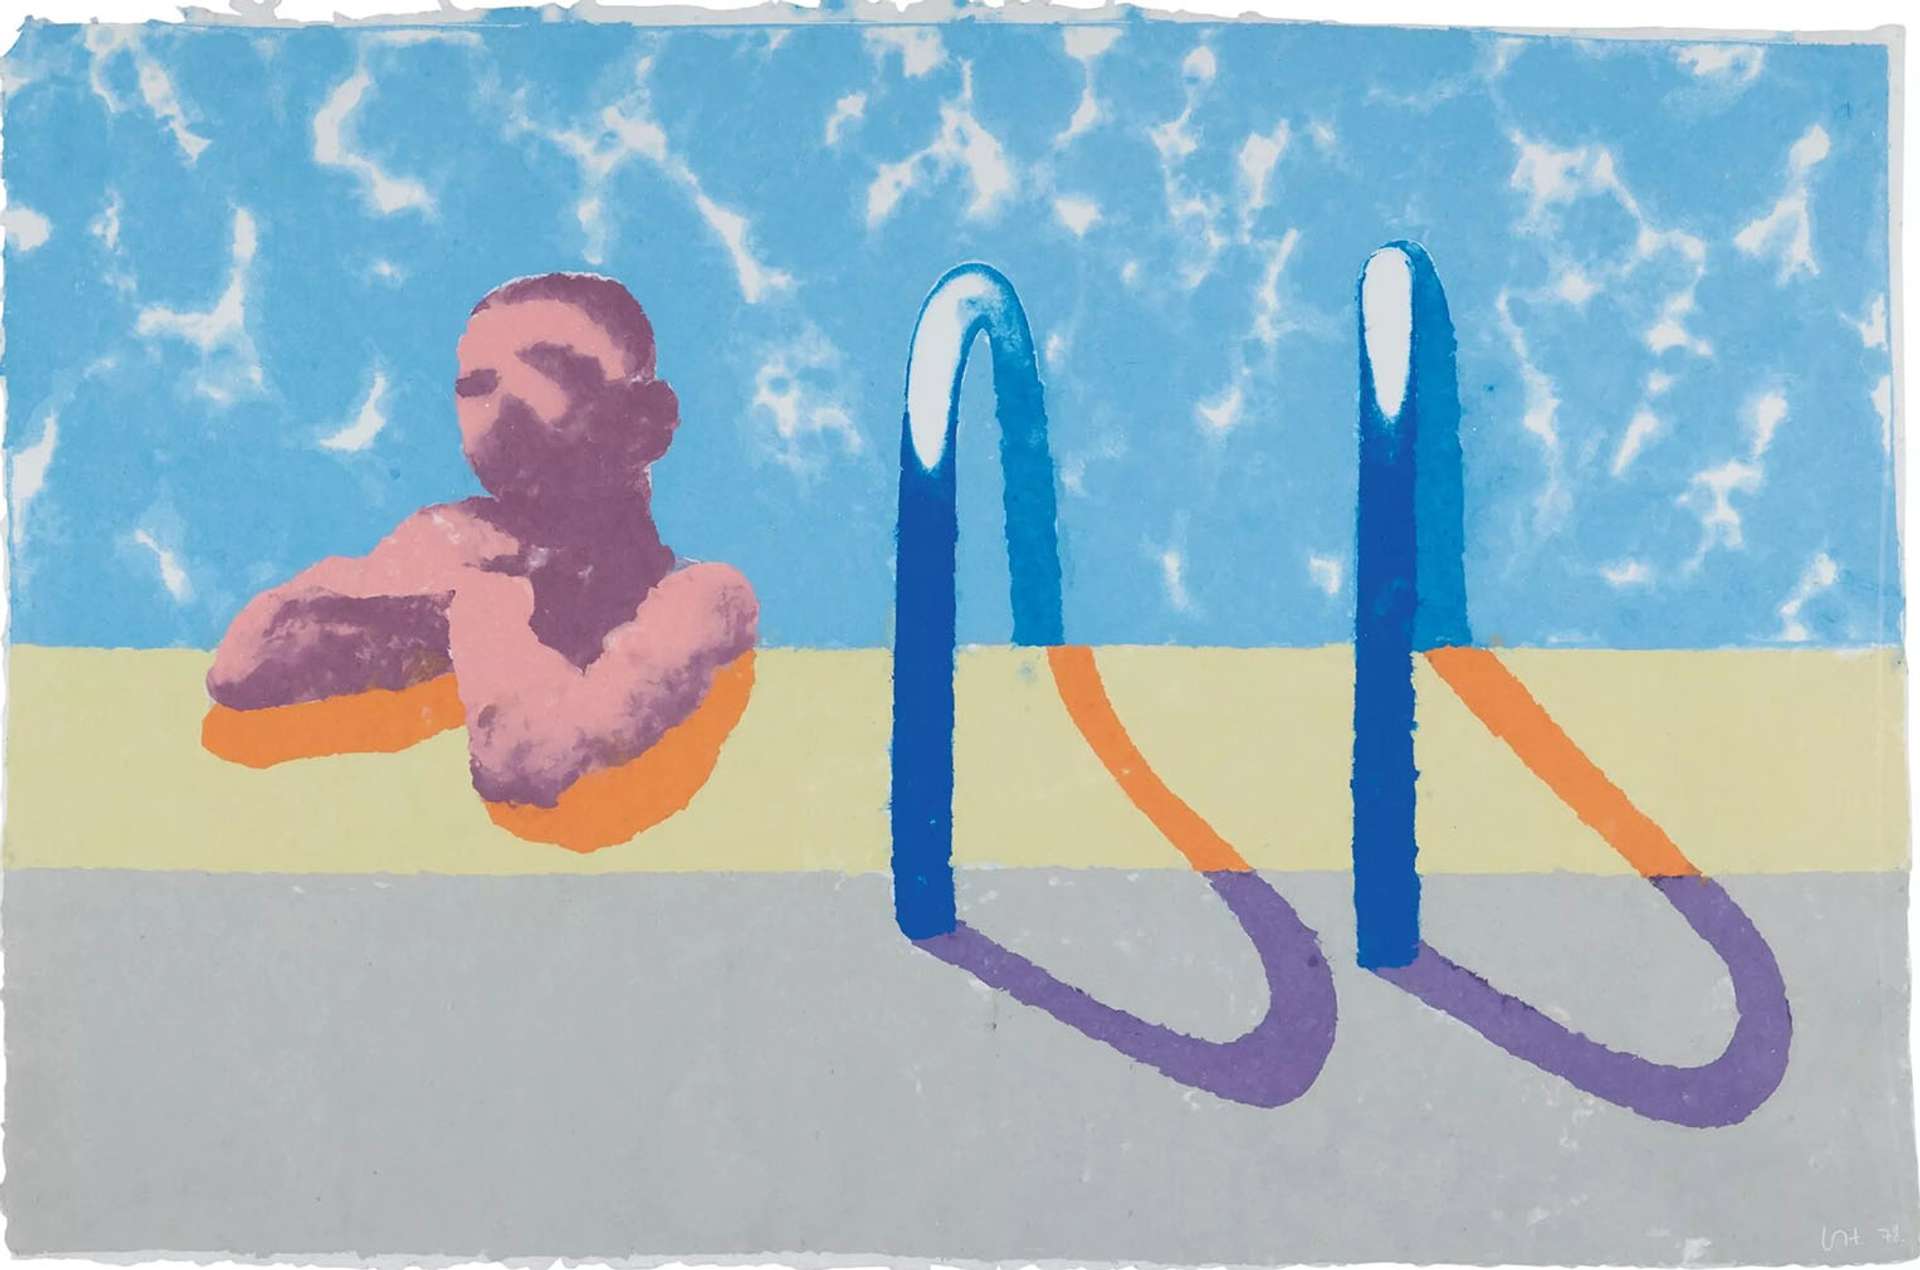 A young man appears at the left of the work, abstractly delineated in pink and purple. The figure leans agains the edge of a swimming pool, with the handle bars positioned to the right, casting a shadow into the foreground of the composition.